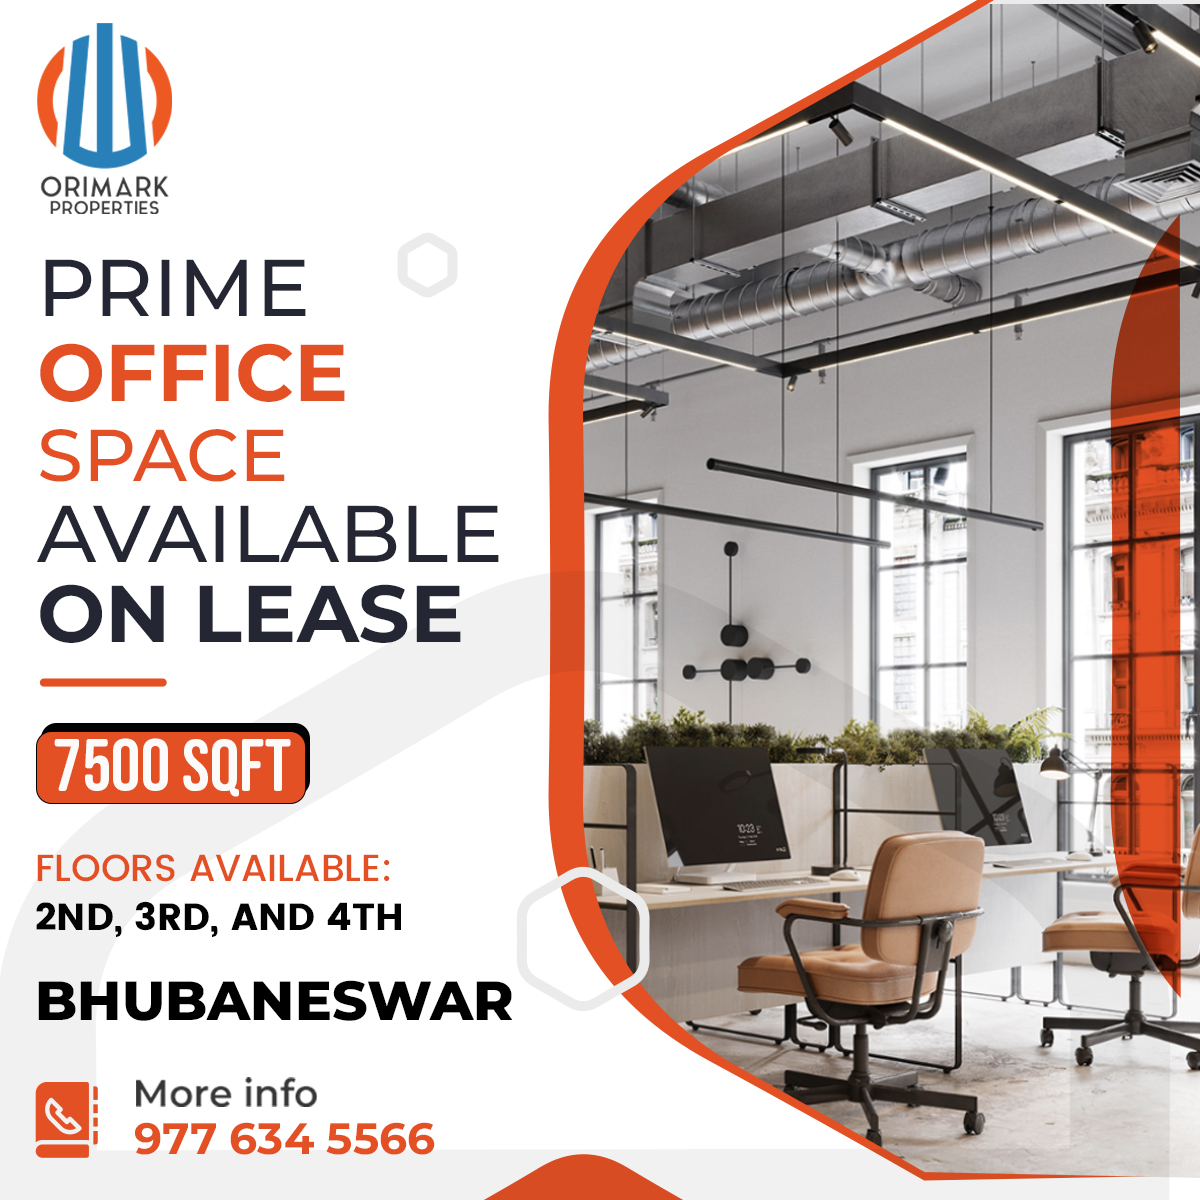 Top Benefits of Renting Office Space in Bhubaneswar to Grow Your Business – Residential and Commercial Properties in Bhubaneswar